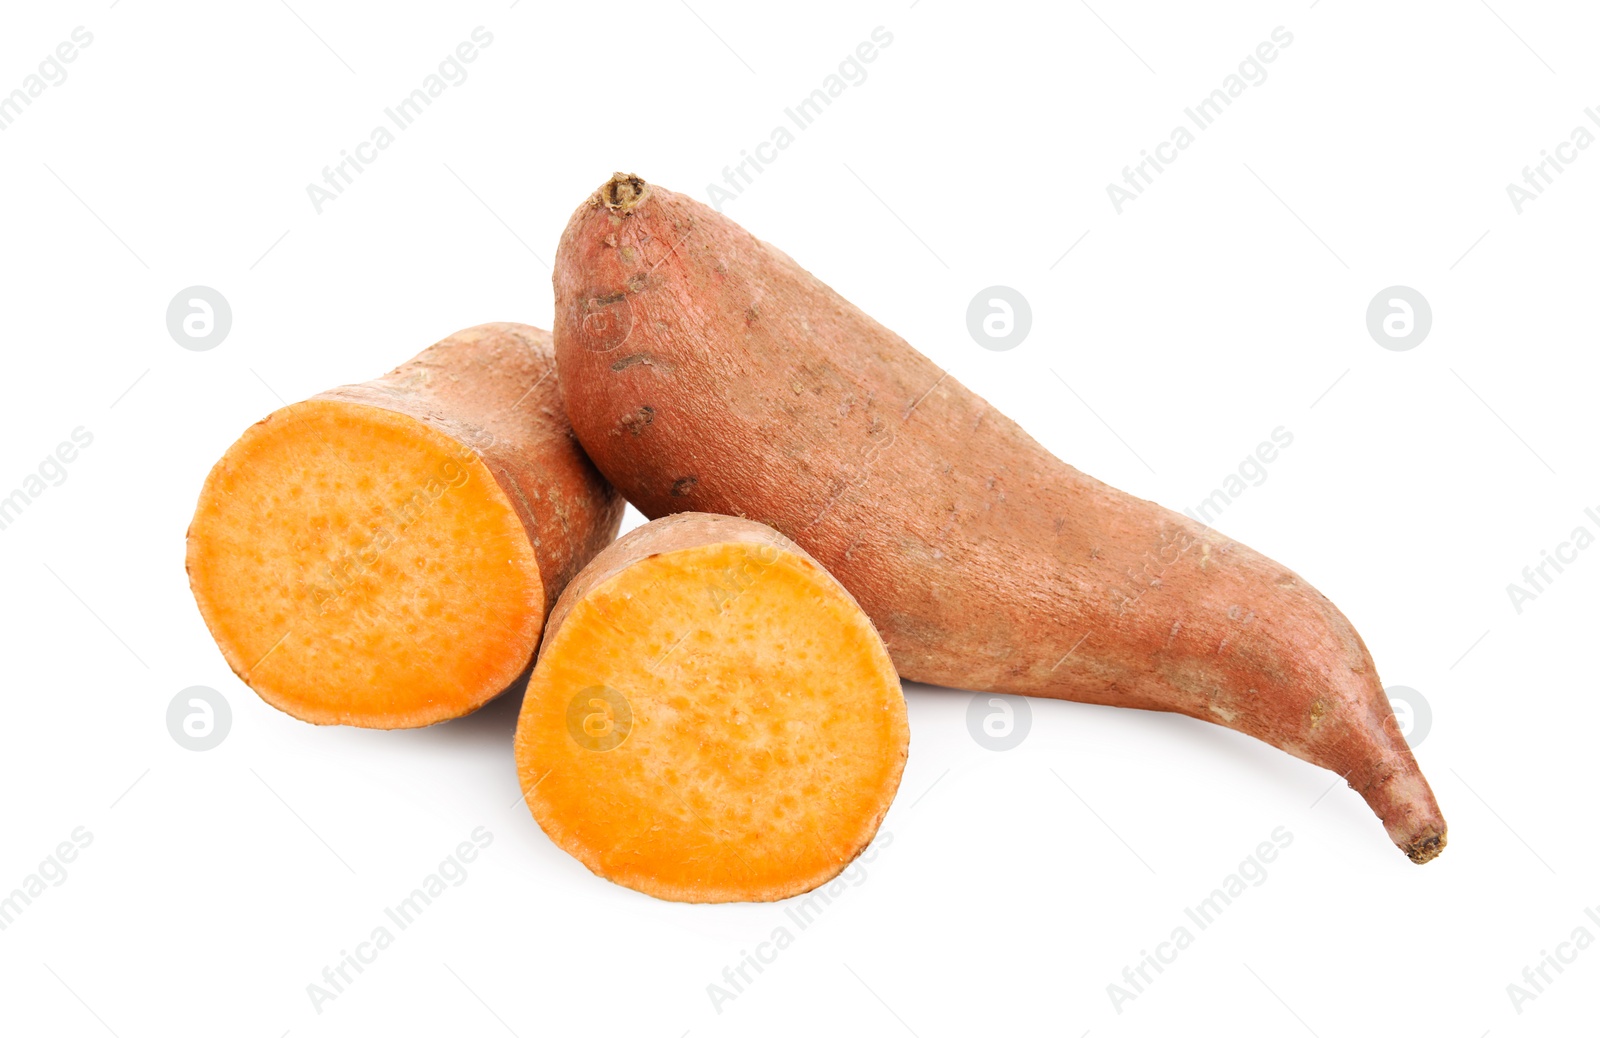 Photo of Whole and cut sweet potatoes on white background